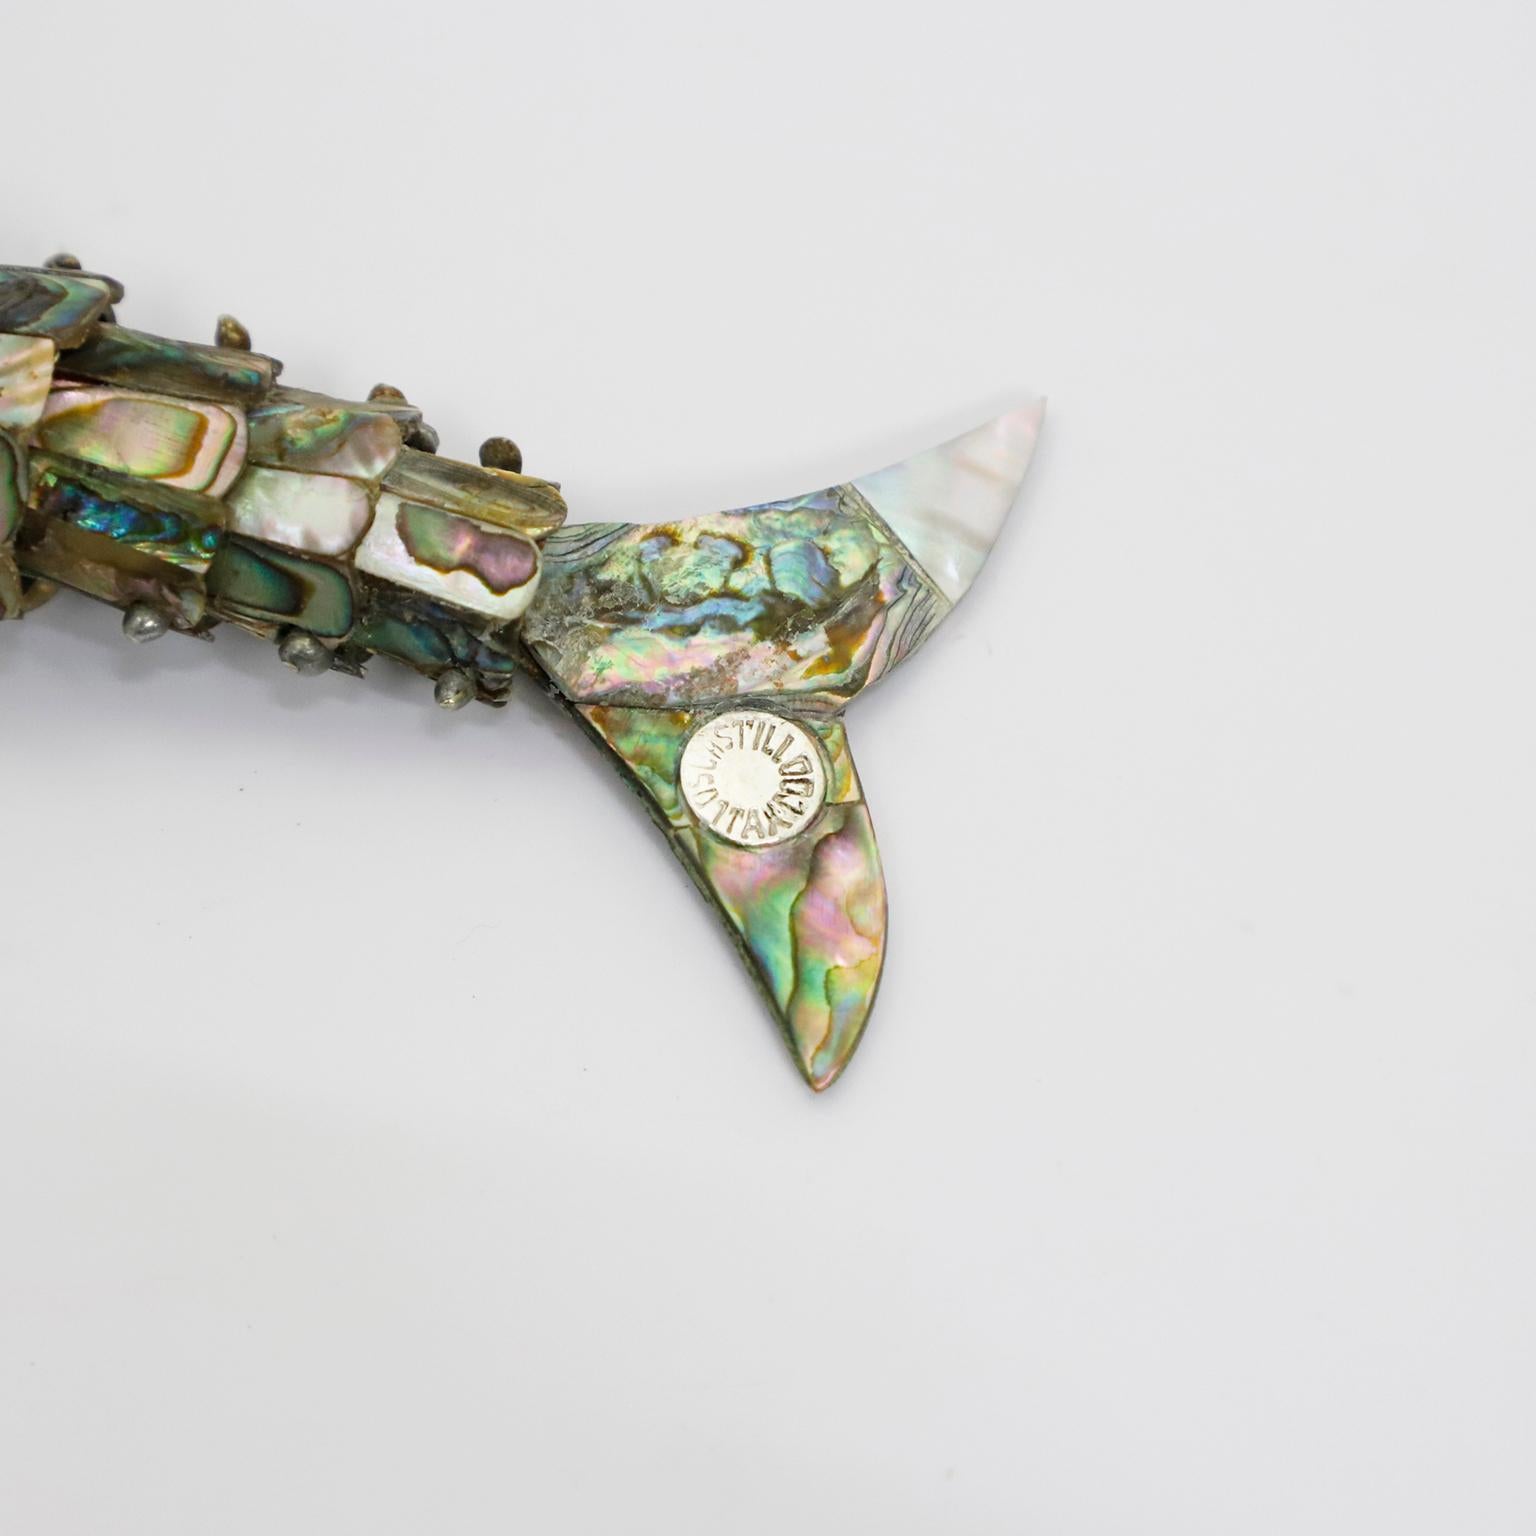 Beautiful vintage Mexican abalone shell and brass bottle opener in the form of fish by Los Castillo.
The mouth of the fish are made of brass which has a very nice aged patina. Made in Taxco Mexico, circa 1960s.